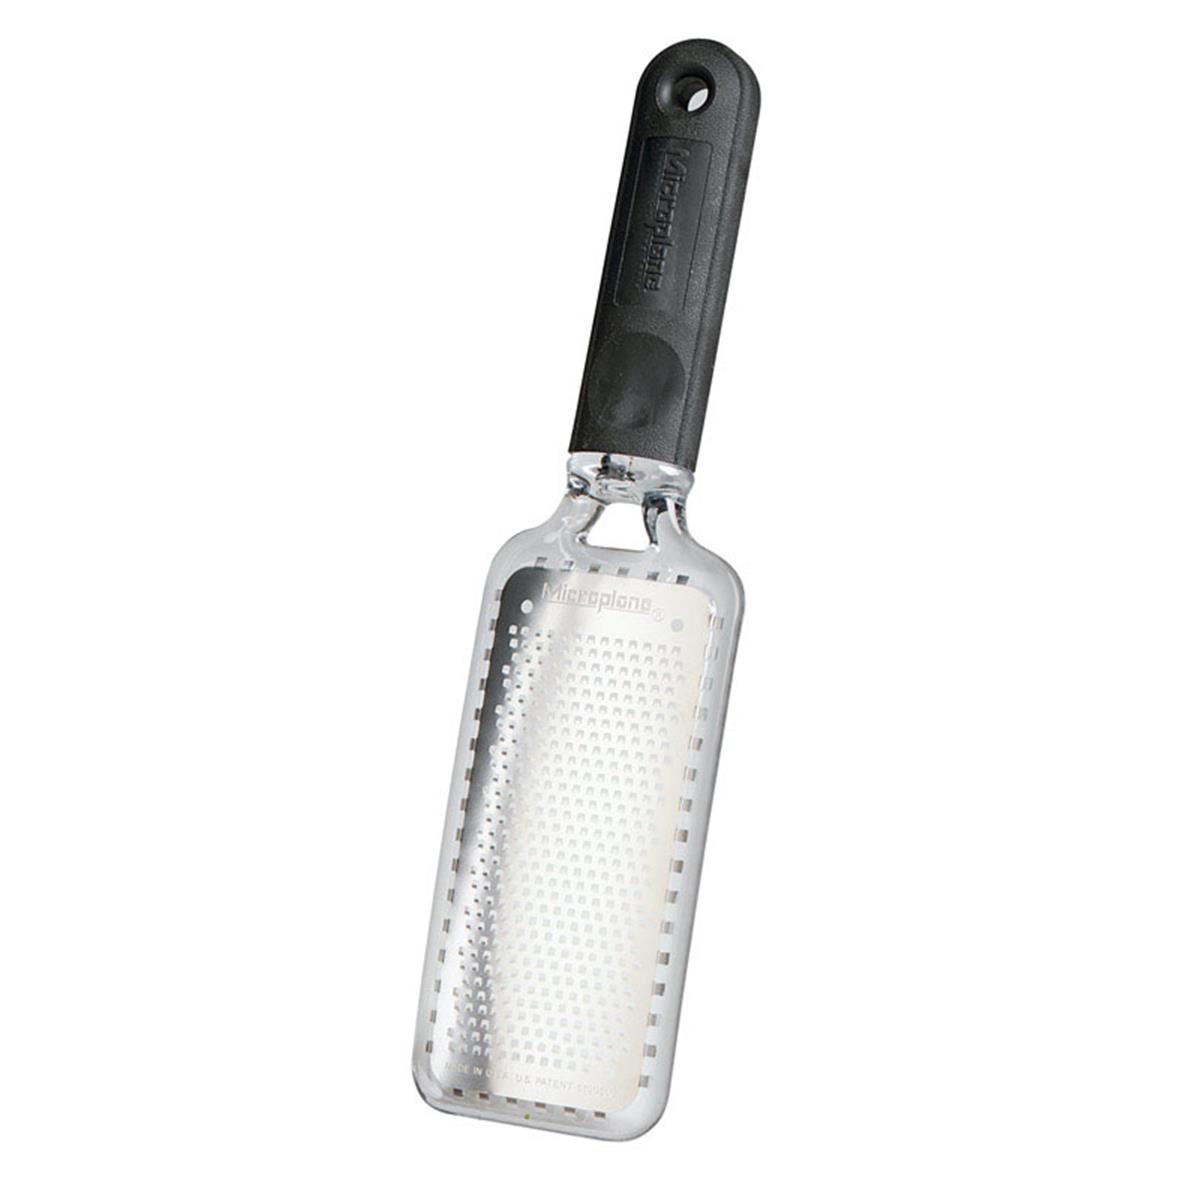 6102503 Microplane Stainless Steel Fine Grater, Silver & Black